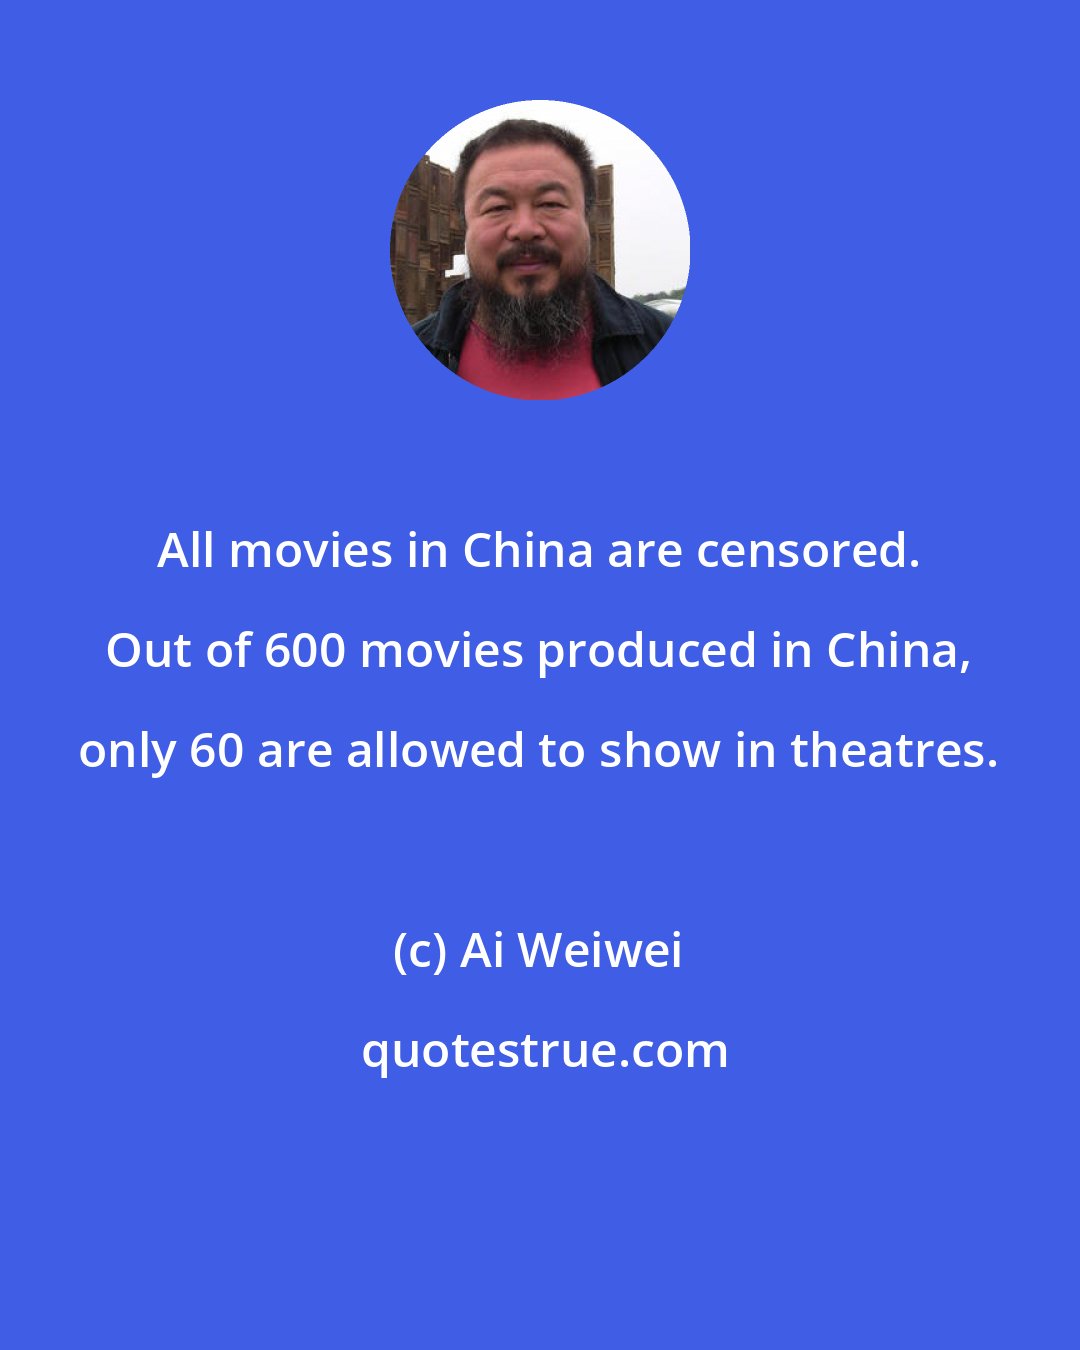 Ai Weiwei: All movies in China are censored. Out of 600 movies produced in China, only 60 are allowed to show in theatres.